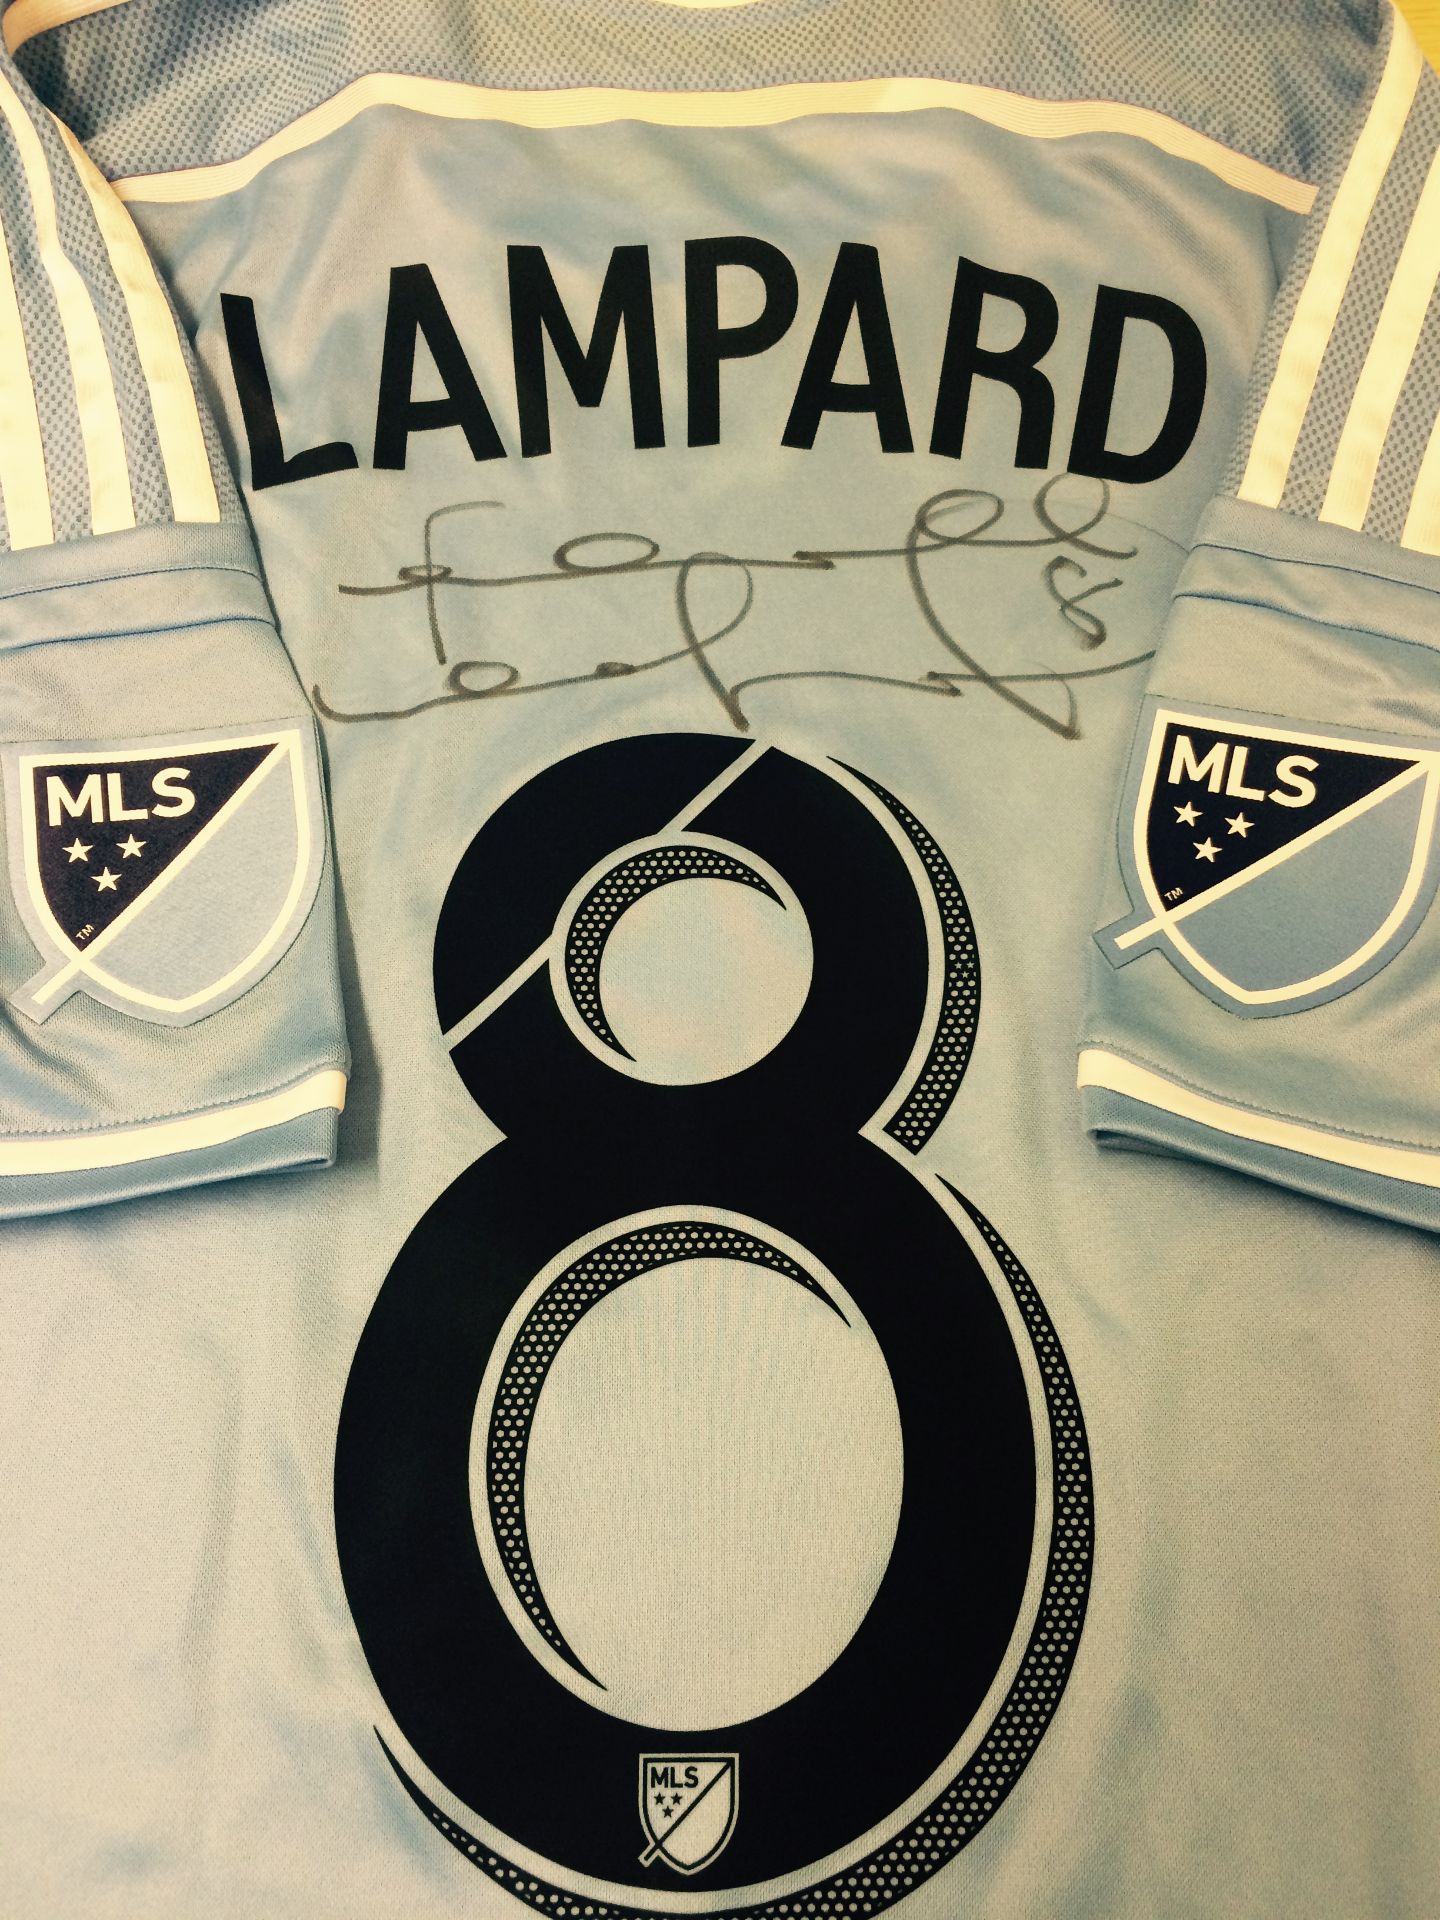 Football Legend Frank Lampard personally donates a signed shirt & boots - Image 2 of 12